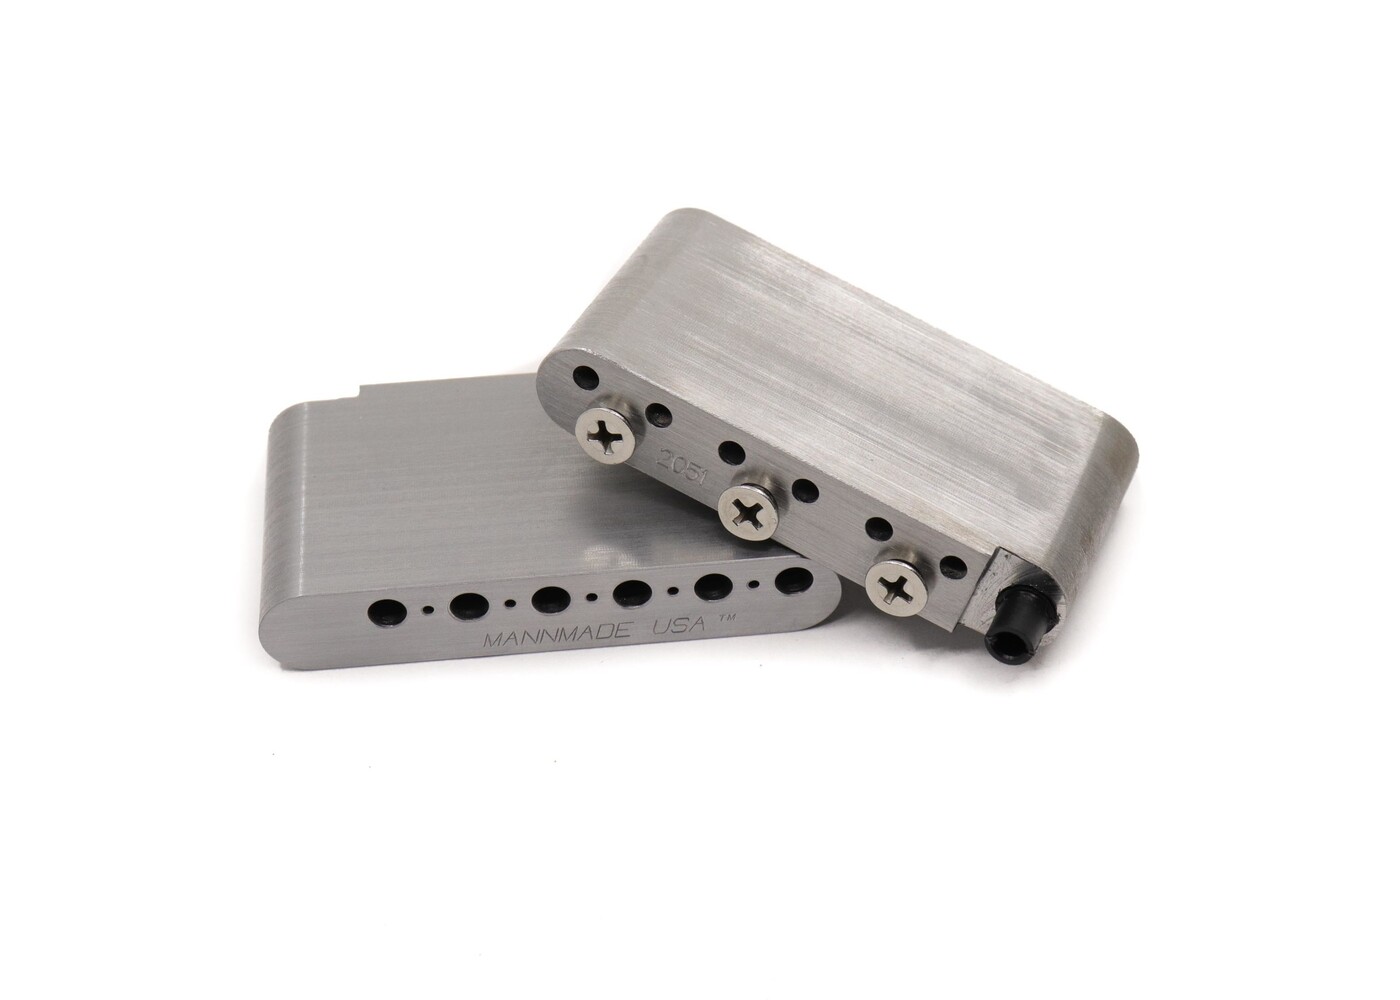 MannMade USA MannMade USA Upgrade Steel Block - PRS SE Silver Sky Bridges - Right Hand